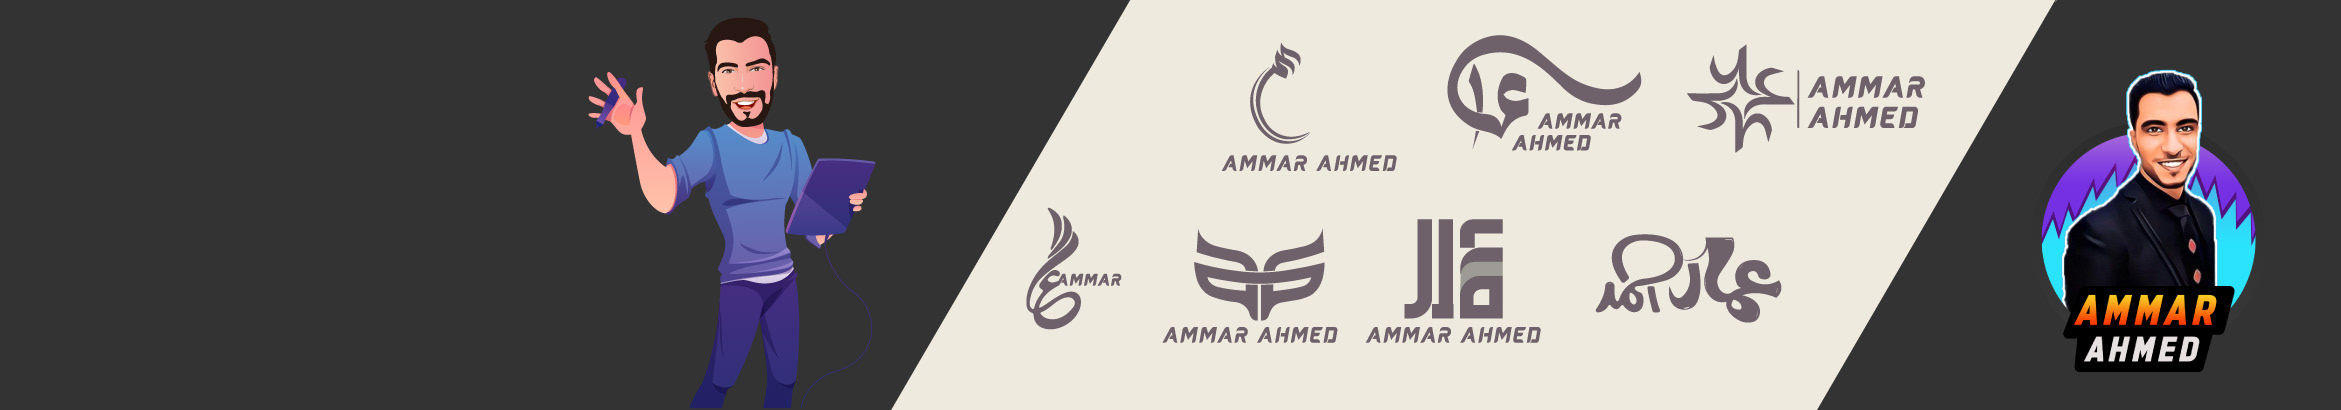 Ammar Ahmed's profile banner